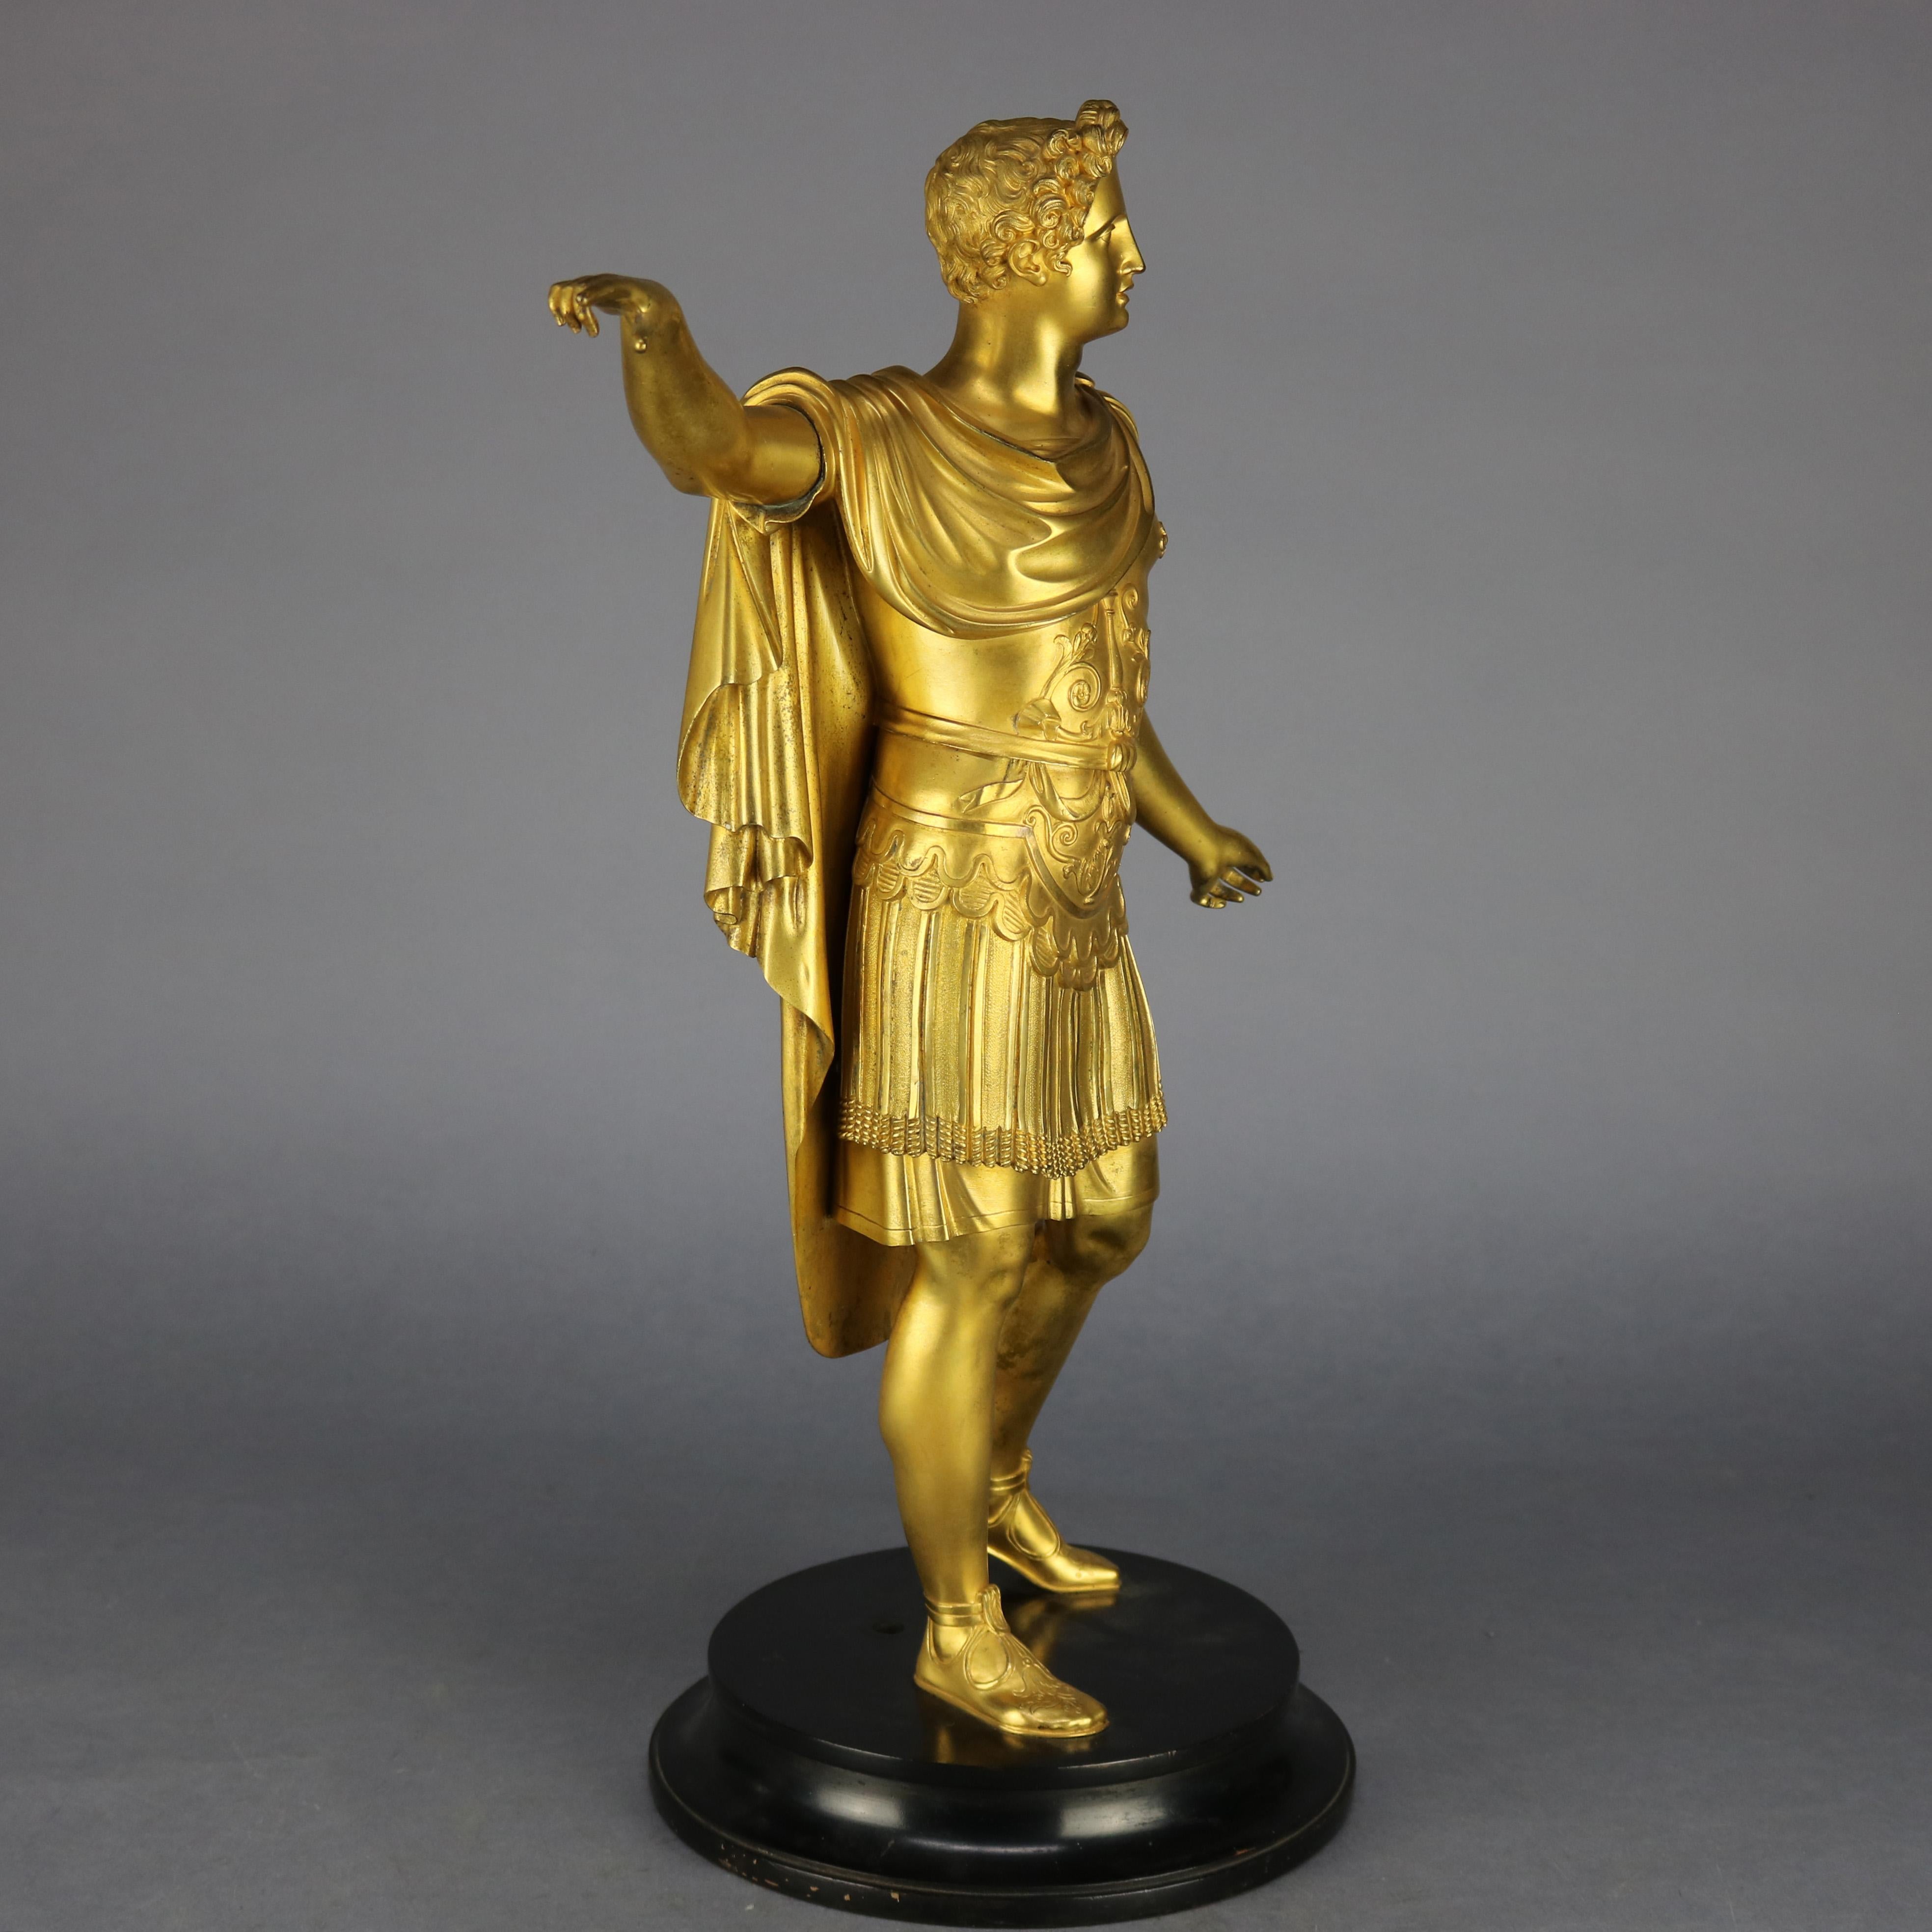 An antique Classical Grand Tour sculpture offers gilt cast bronze construction with full length portrait sculpture of Greek or Roman emperor, seated on marble plinth, 19th century.

Measures: 20.75